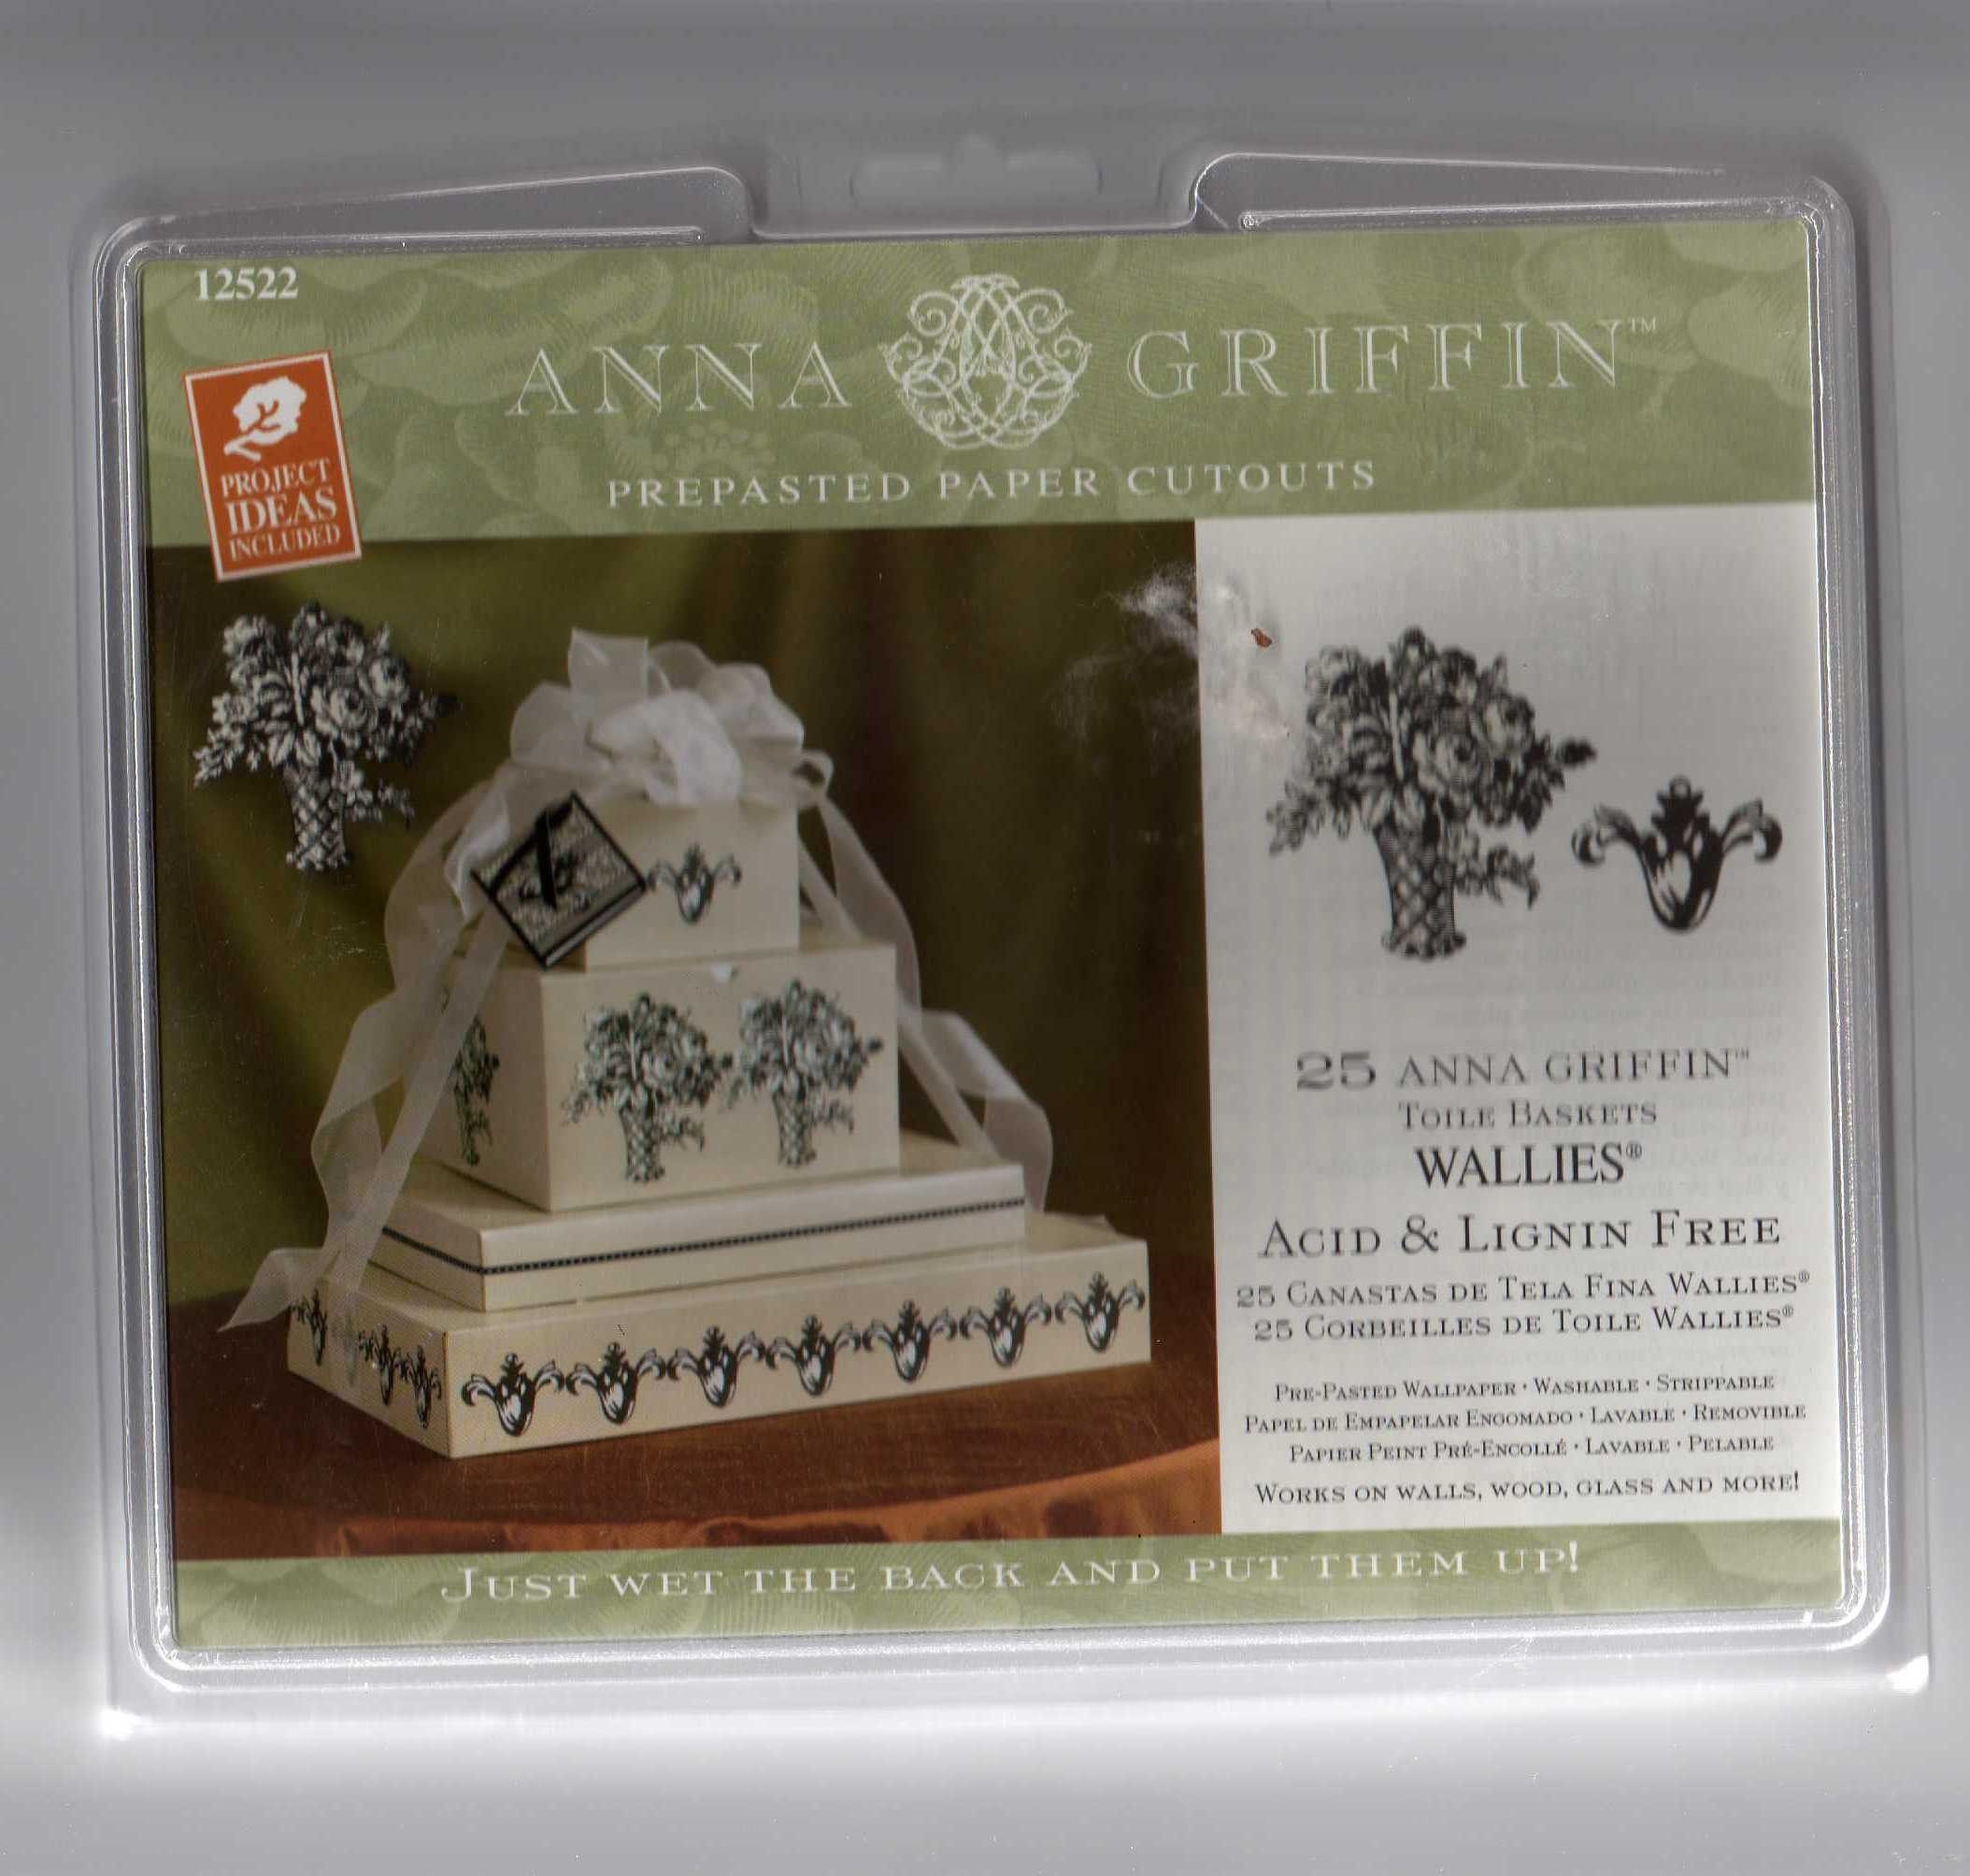 This is a package of Anna Griffins Prepasted Wallpaper Cutouts. This set is Toile Baskets. It looks like there are two different cutouts.